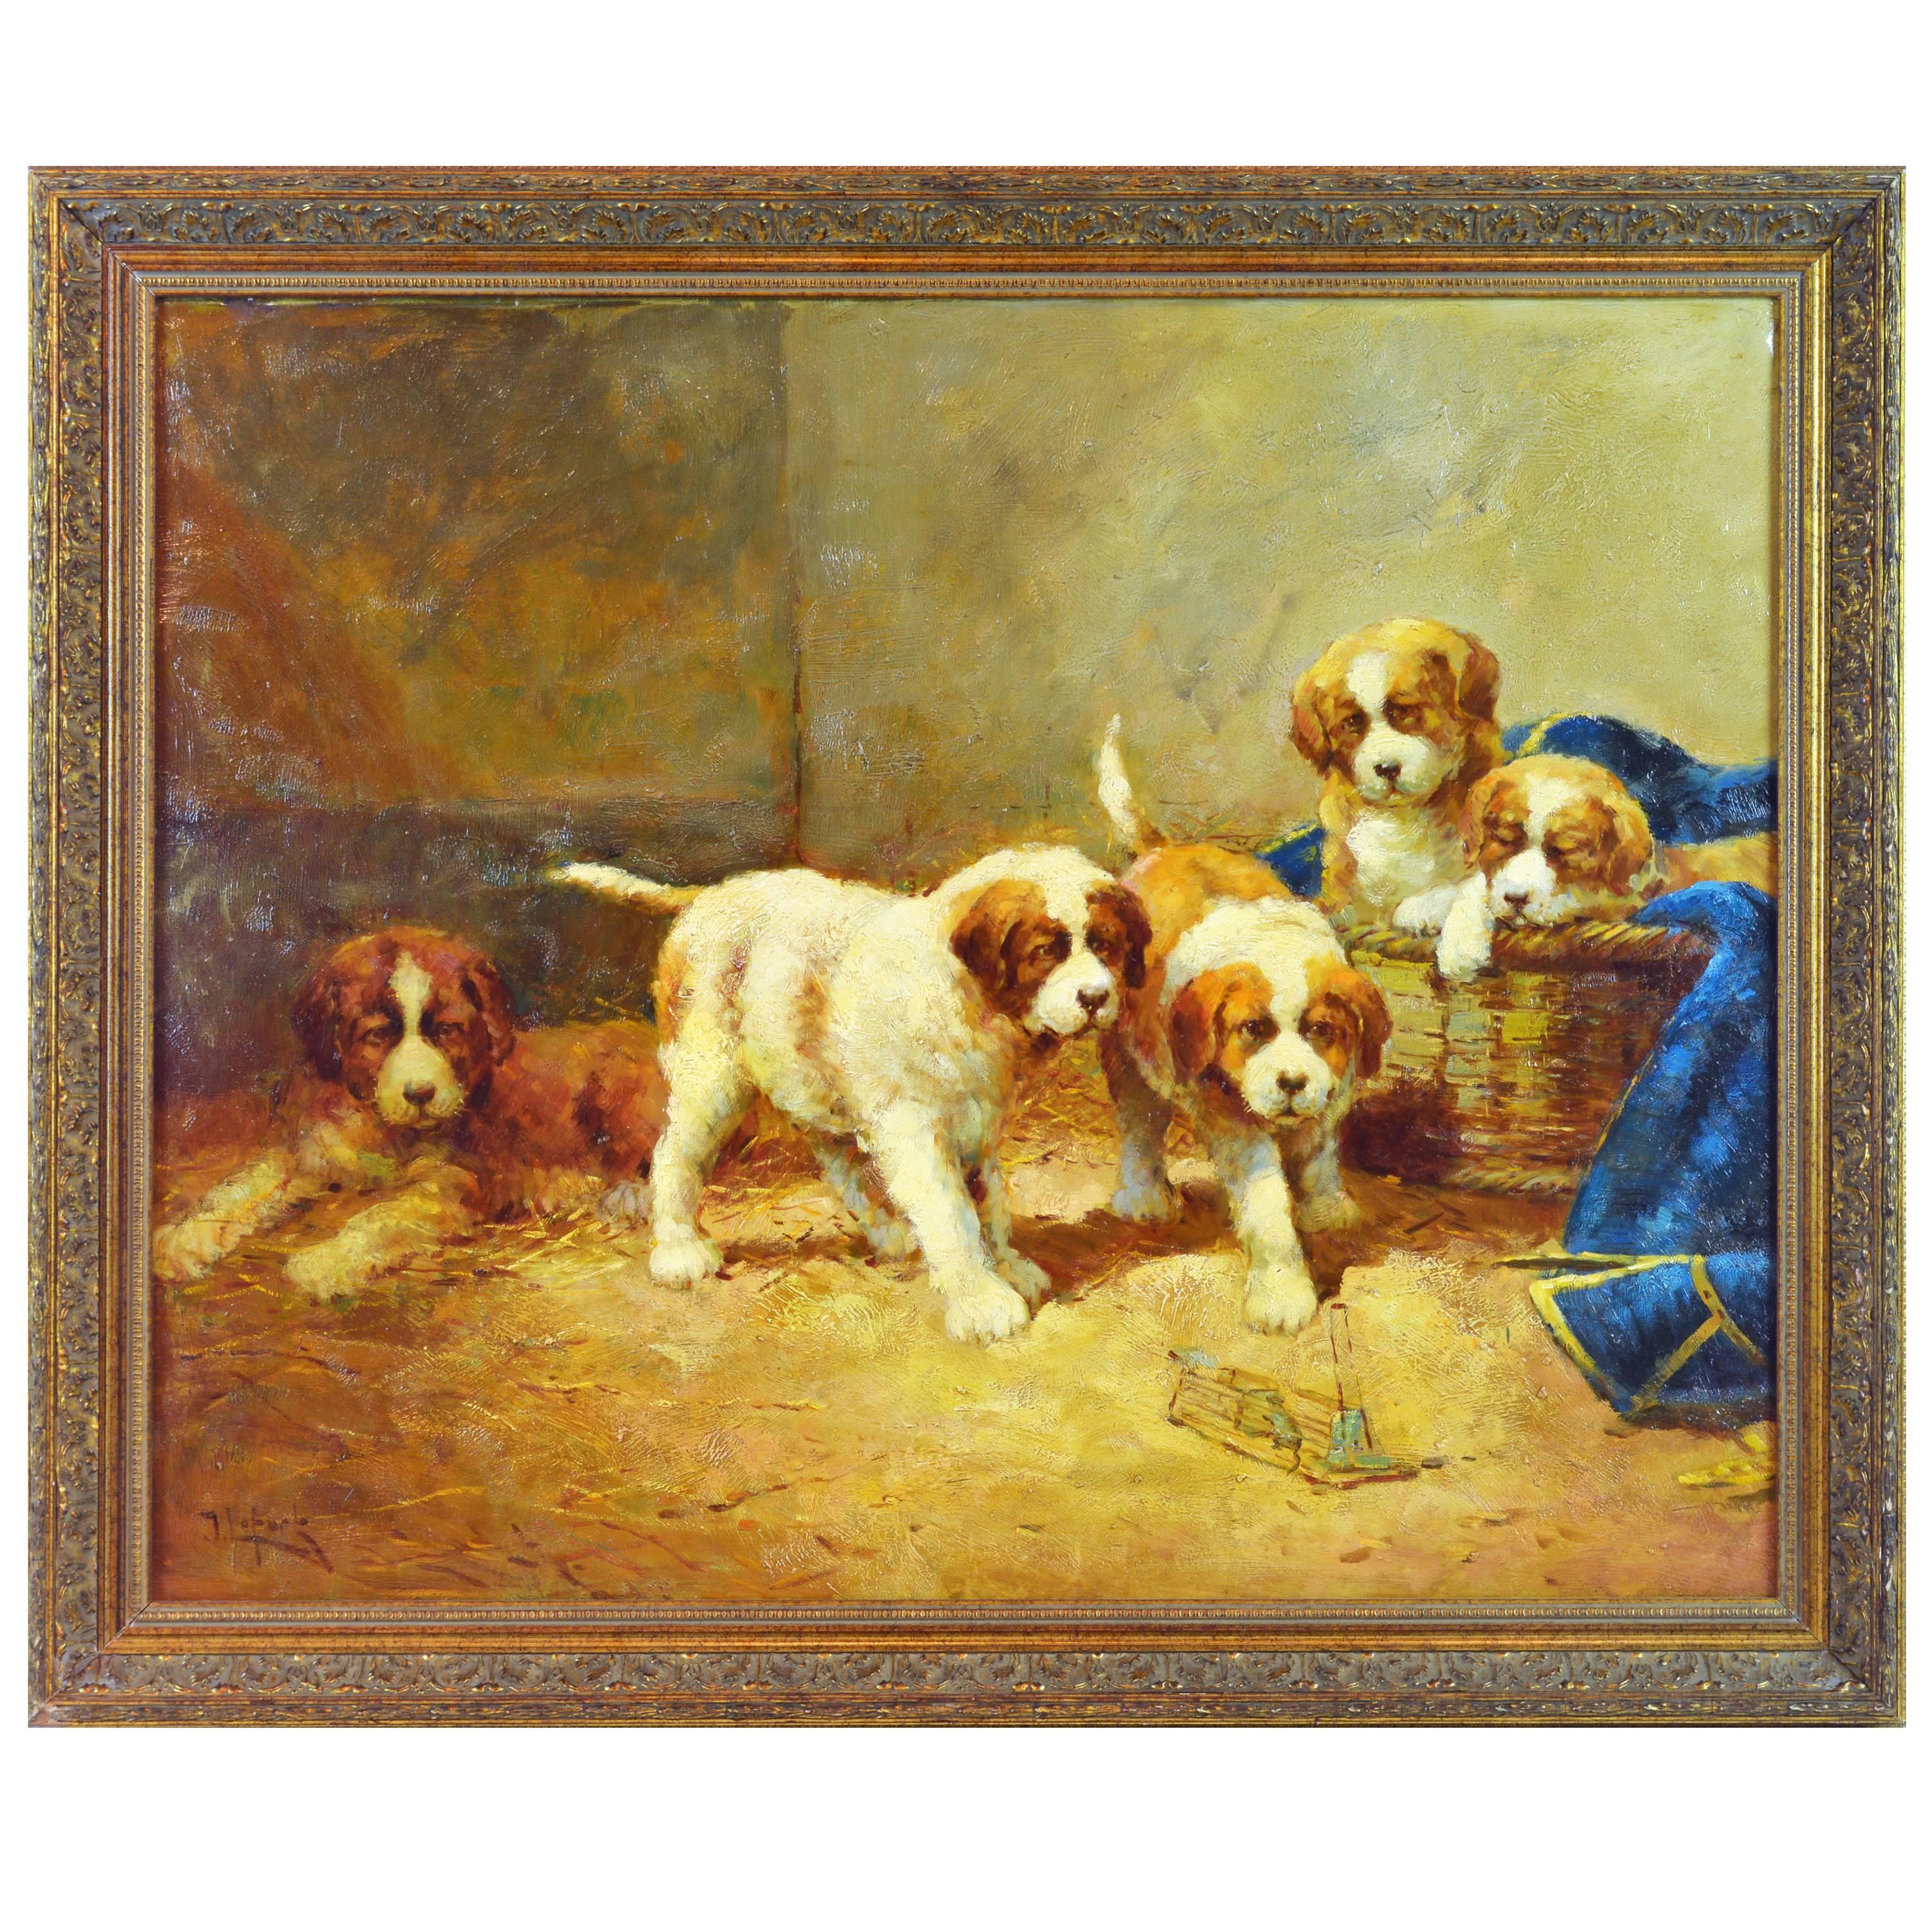 Family of St. Bernard Puppies Playing Around a Mouse Trap by Jean Lefort